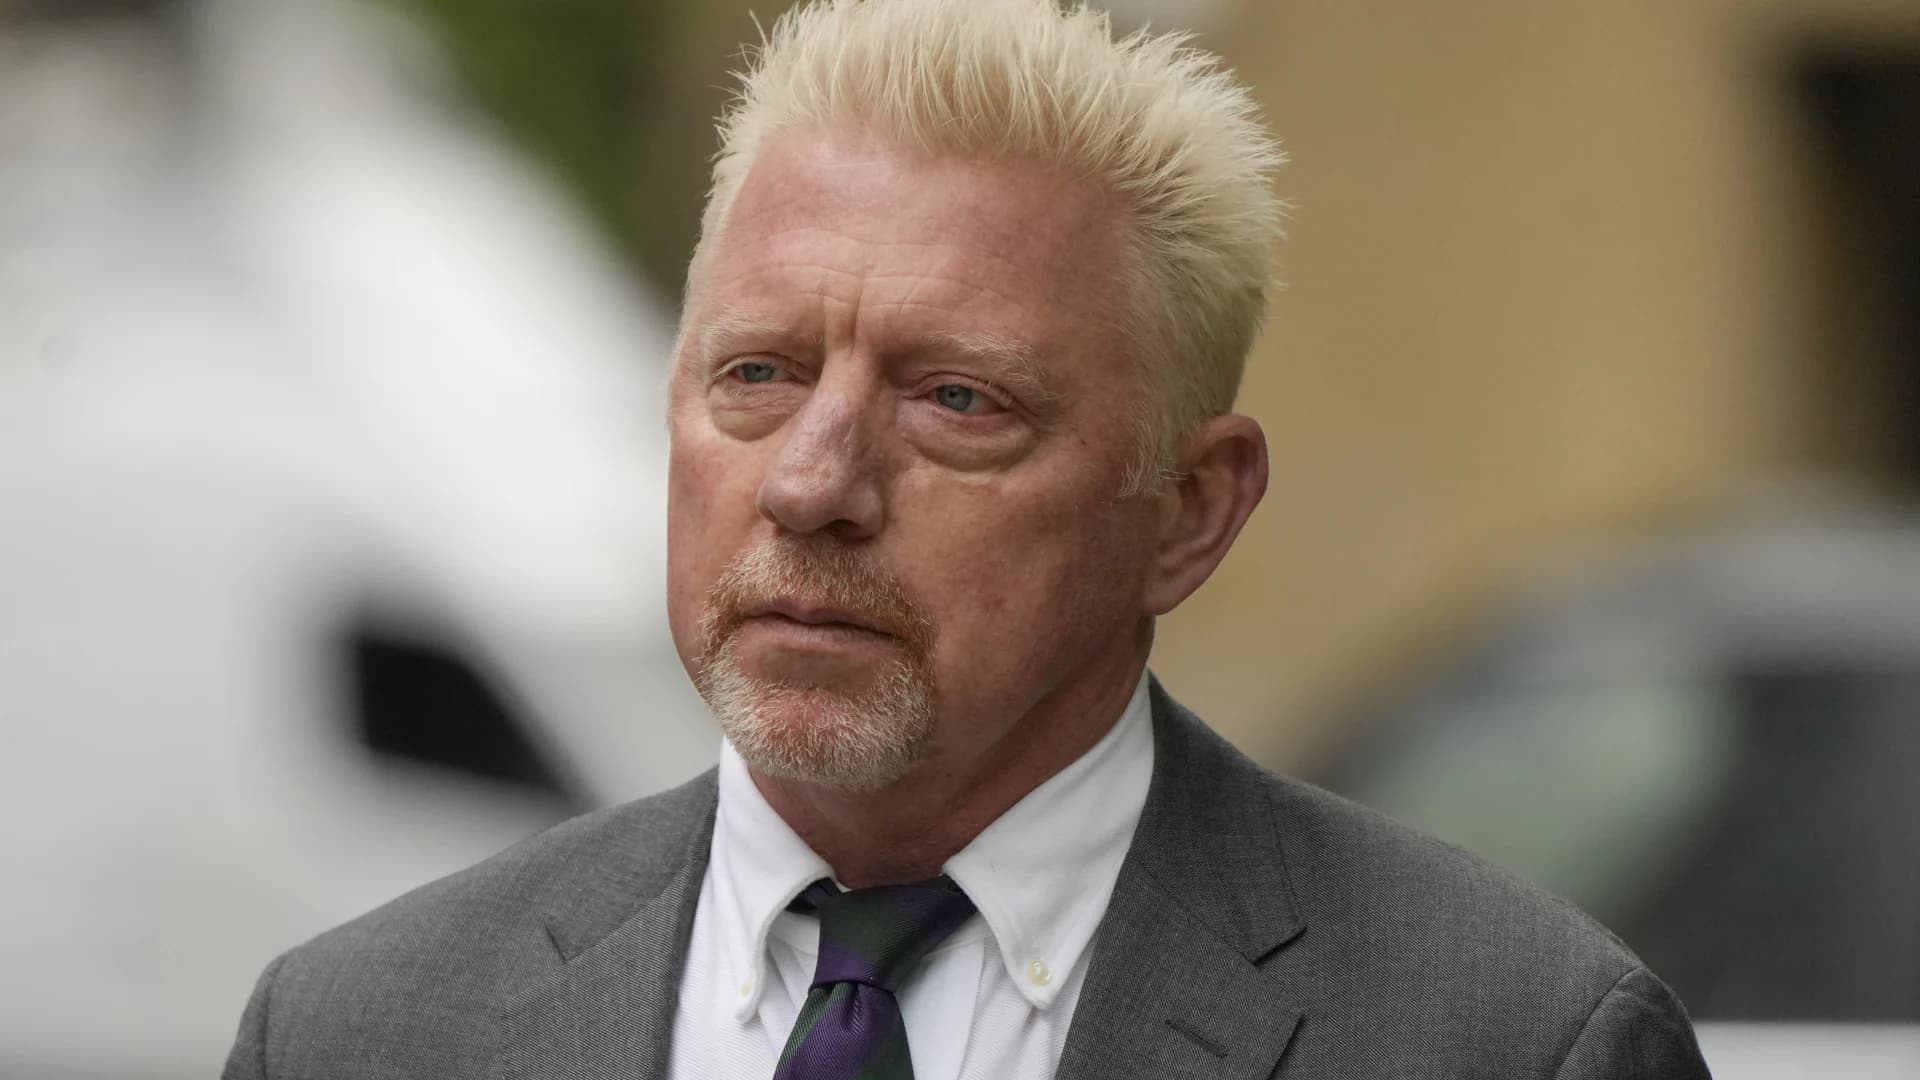 Tennis great Boris Becker gets 2 1/2 years in prison for bankruptcy offenses